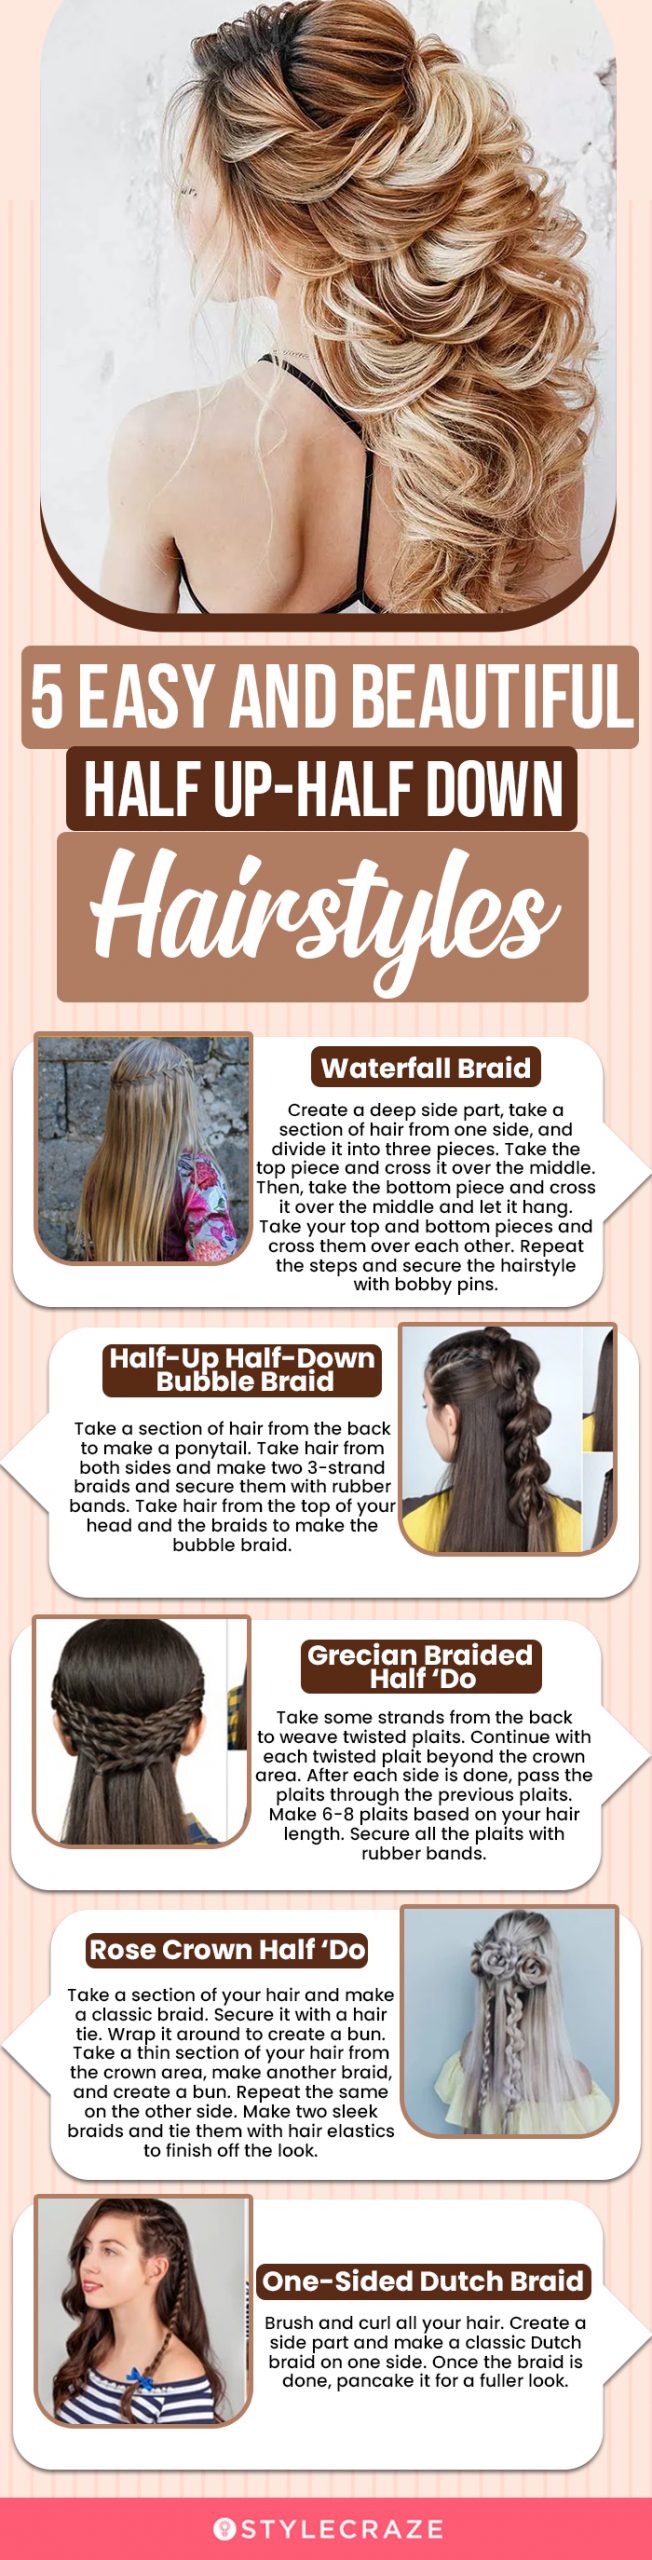 5 easy and beautiful half up half down hairstyles (infographic)